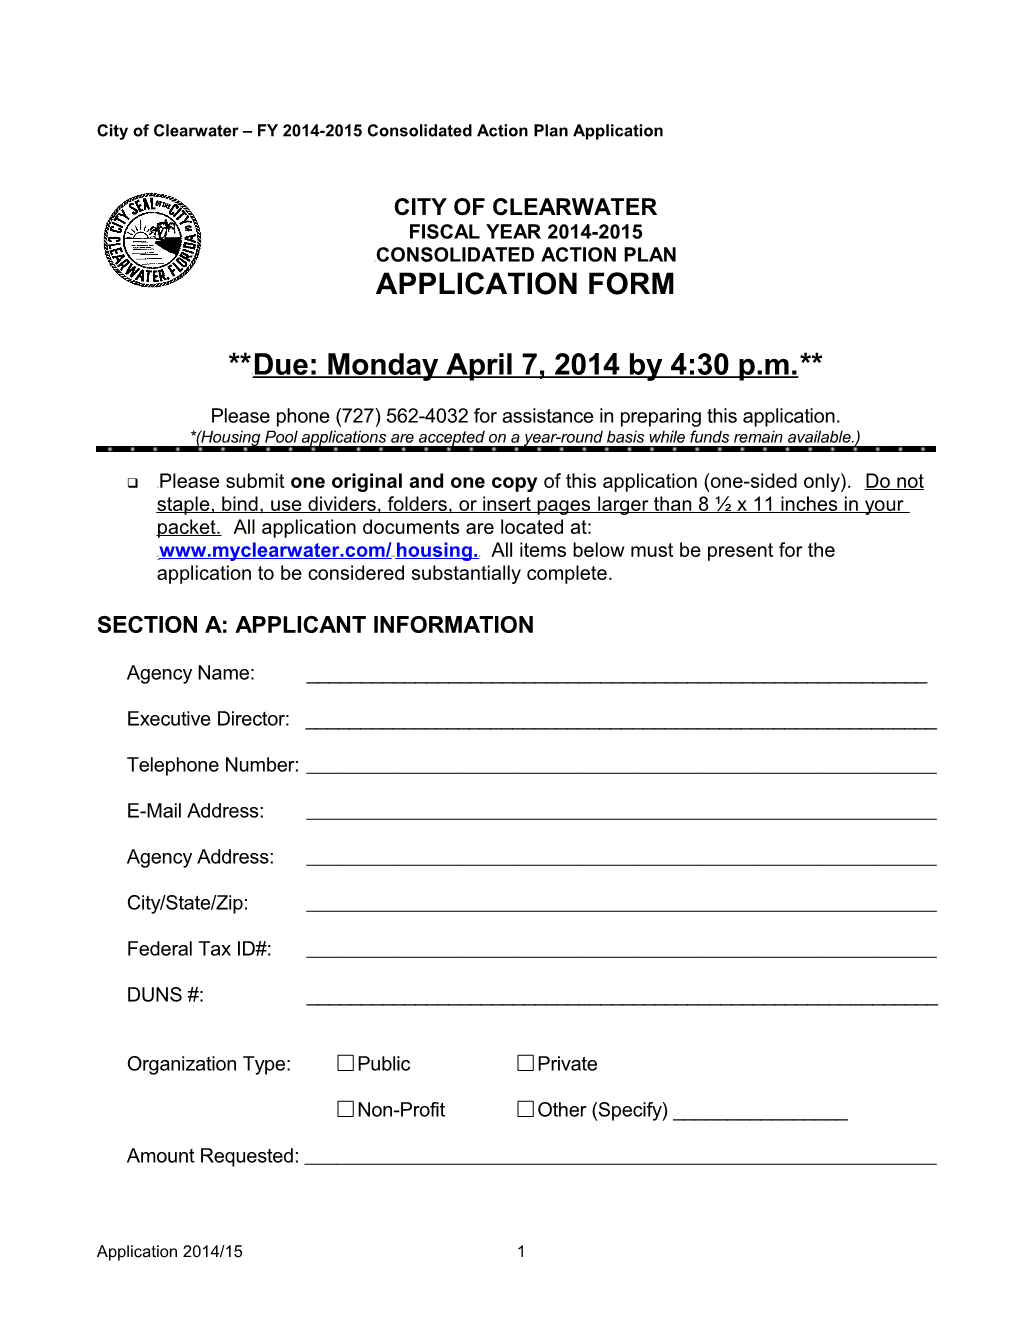 City of Clearwater FY 2014-2015 Consolidated Action Plan Application